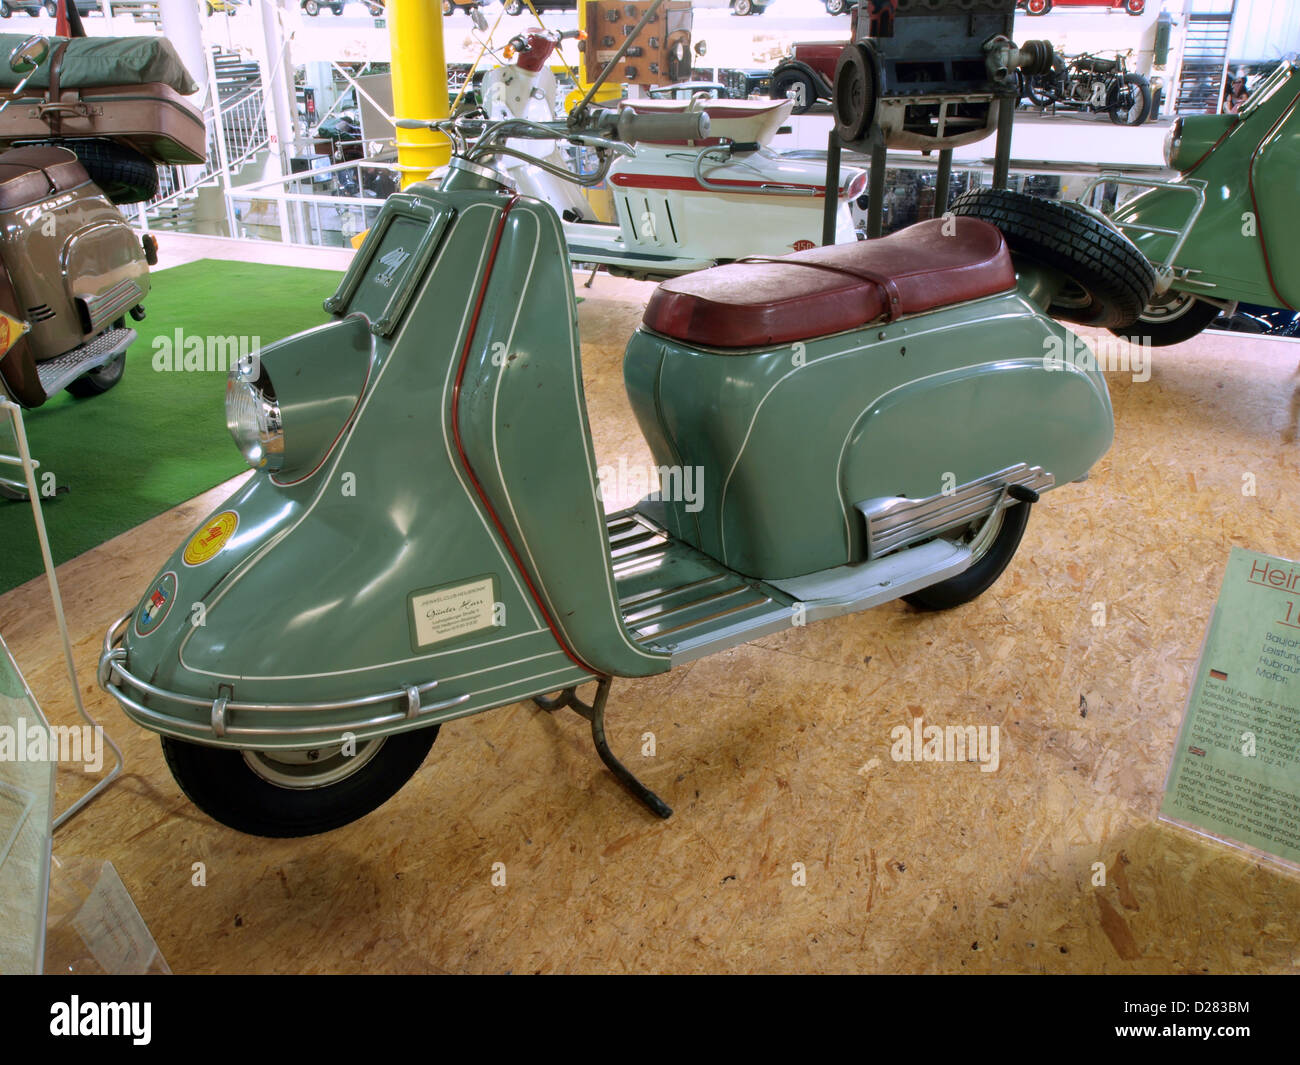 Heinkel Tourist High Resolution Stock Photography and Images - Alamy